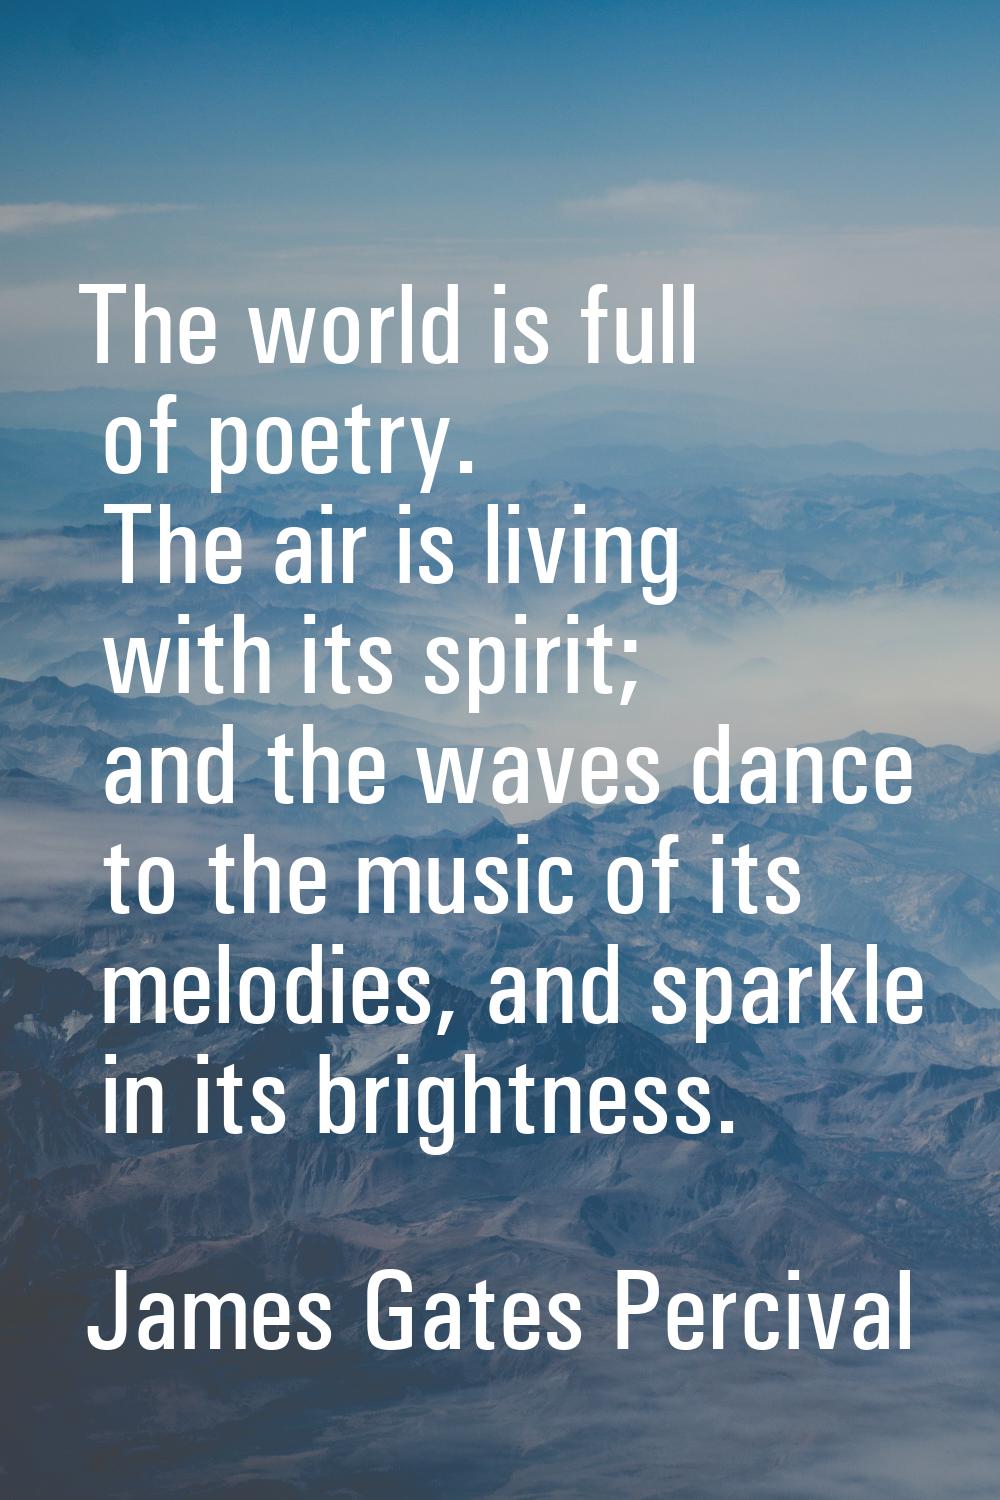 The world is full of poetry. The air is living with its spirit; and the waves dance to the music of